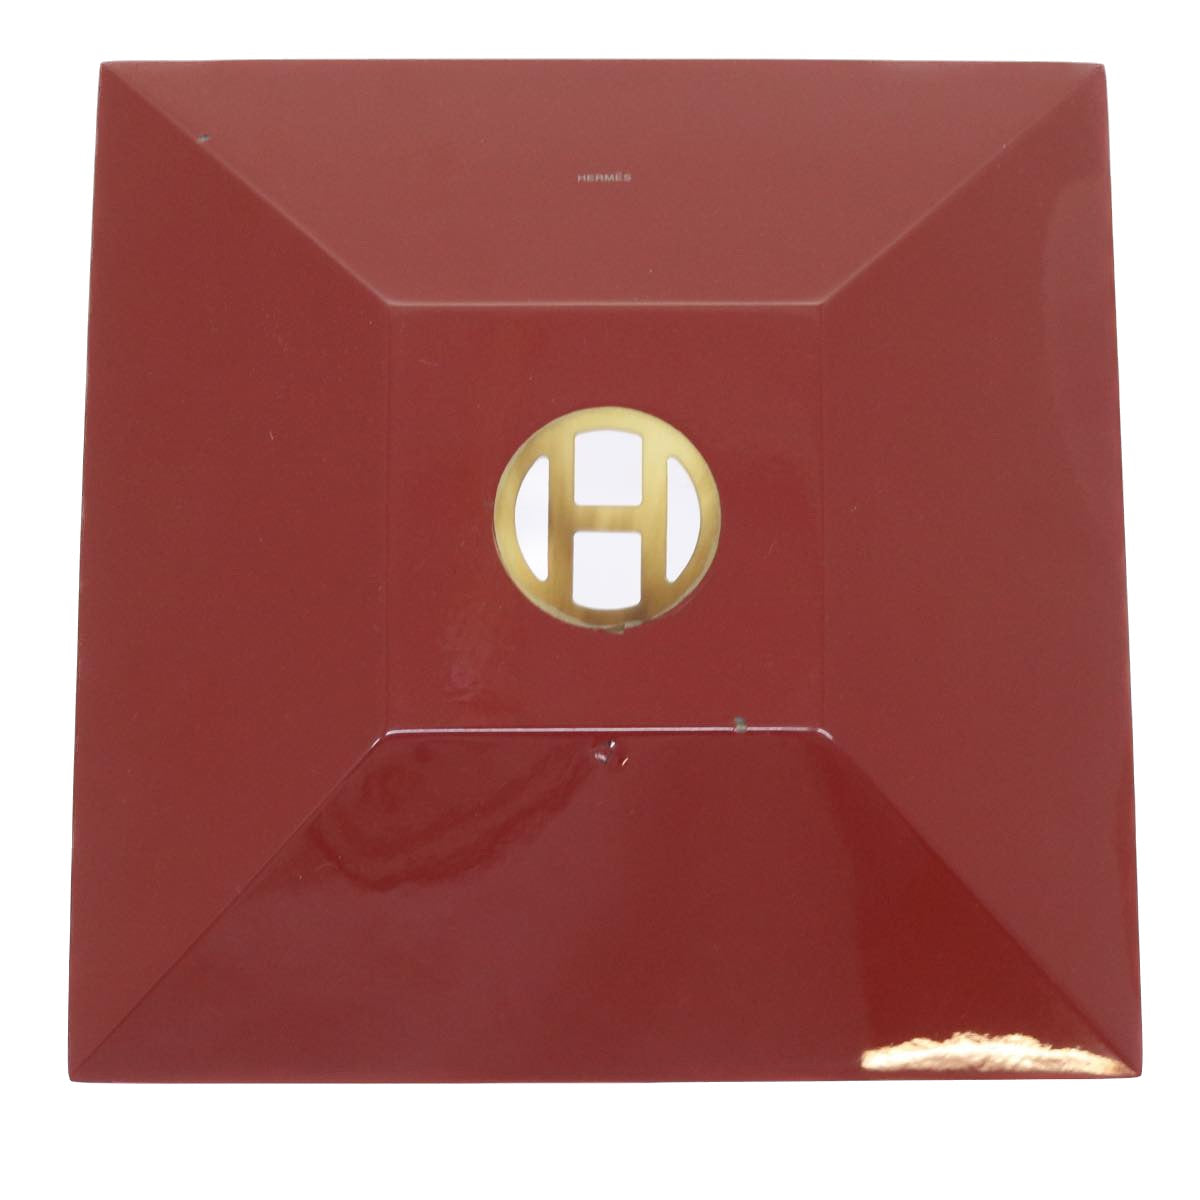 HERMES Buffalo Horn Square Plate Plastic Red Brown Auth bs8647 - 0